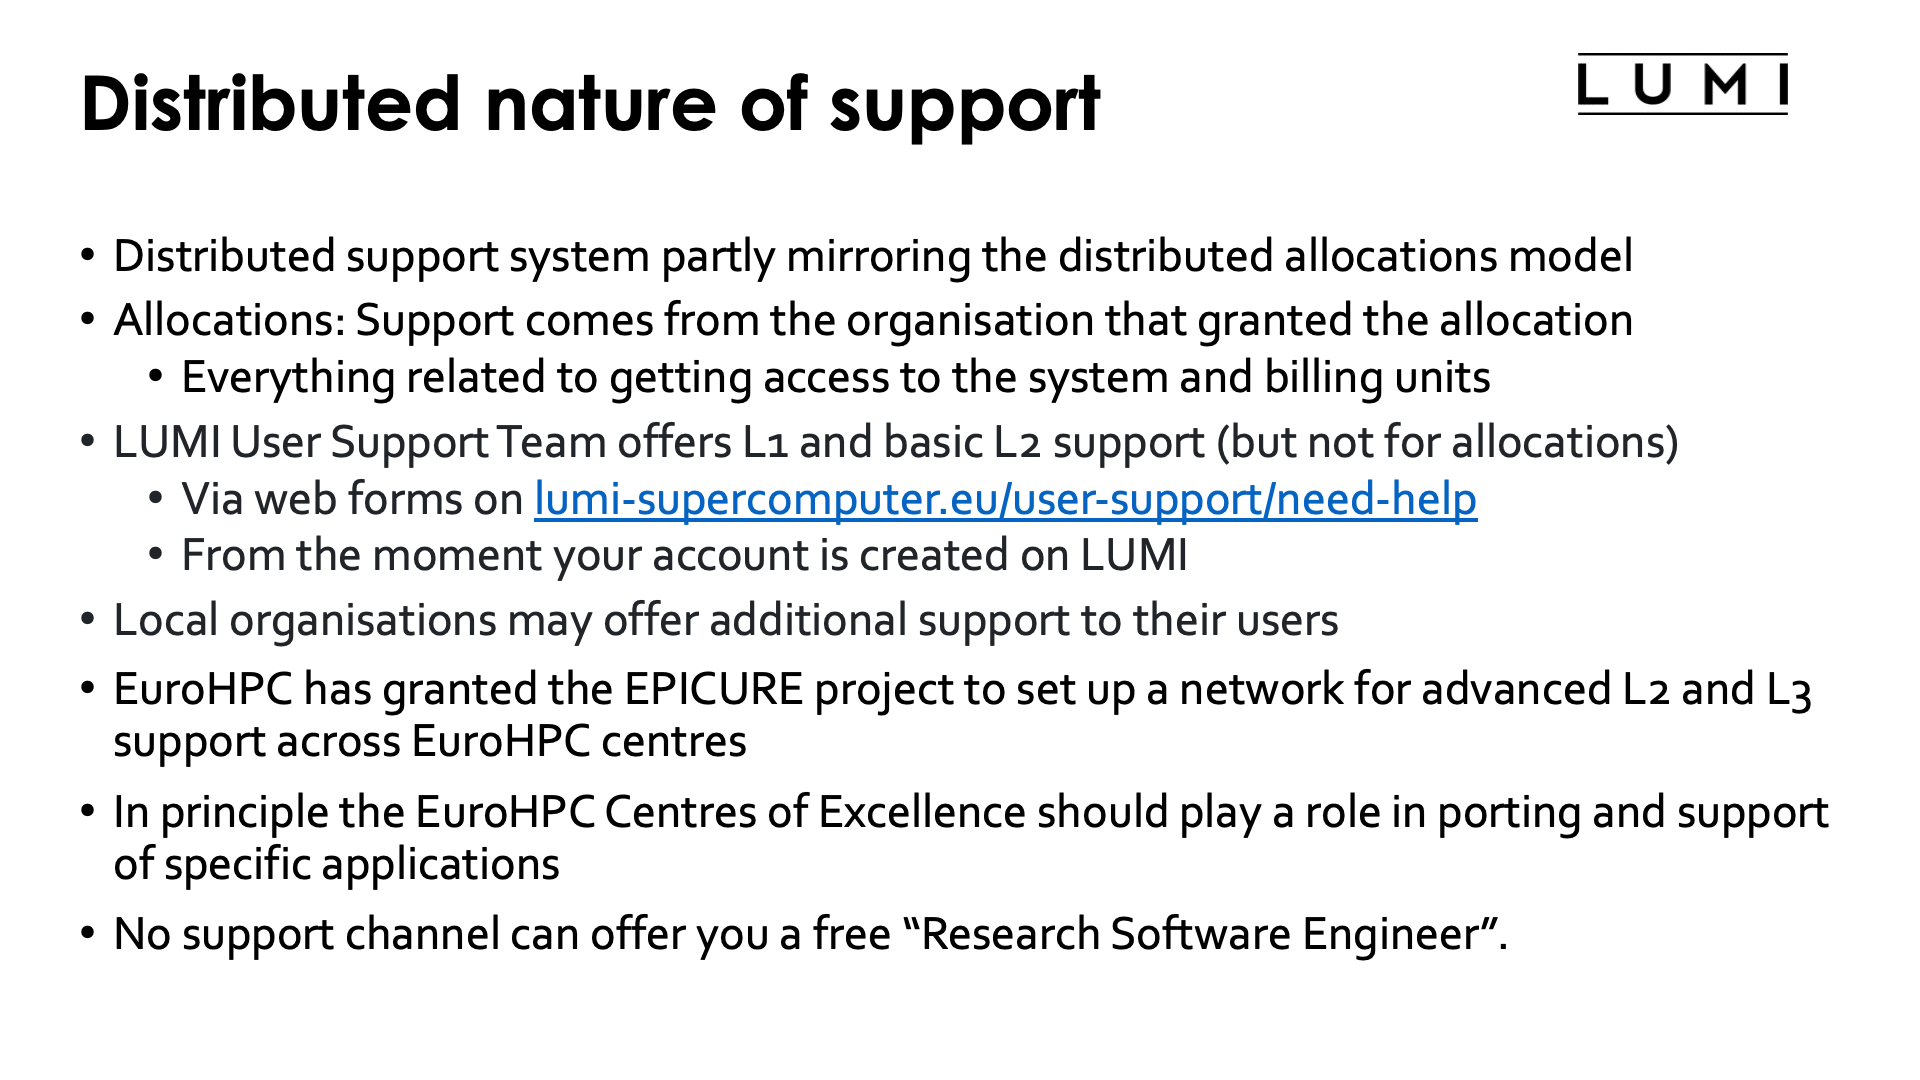 Distributed nature of support (1)